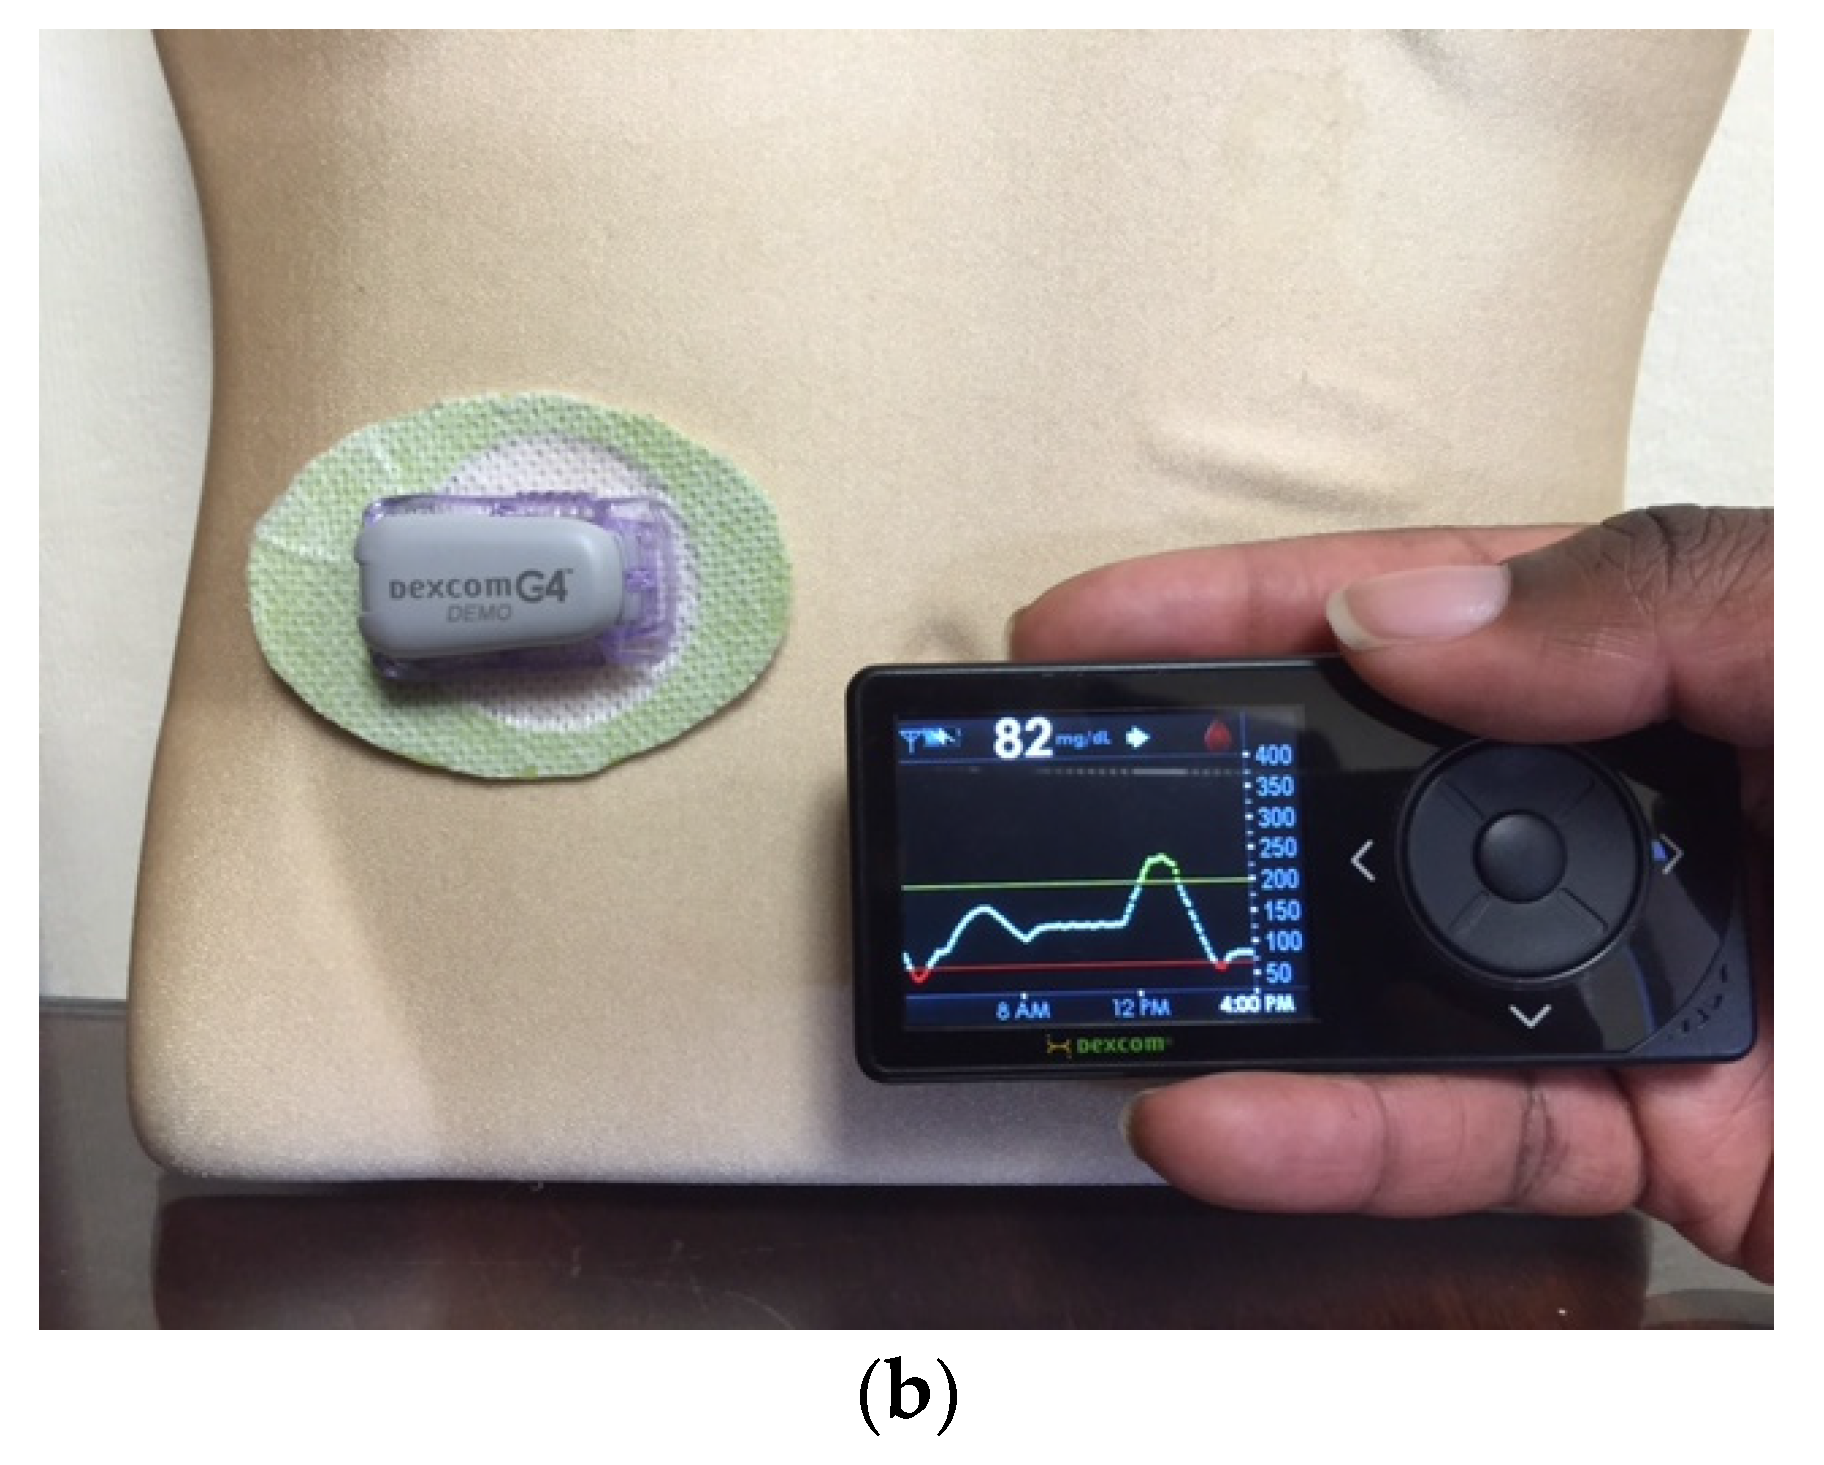 JCM | Free Full-Text | An Overview of Insulin Pumps and Glucose Sensors